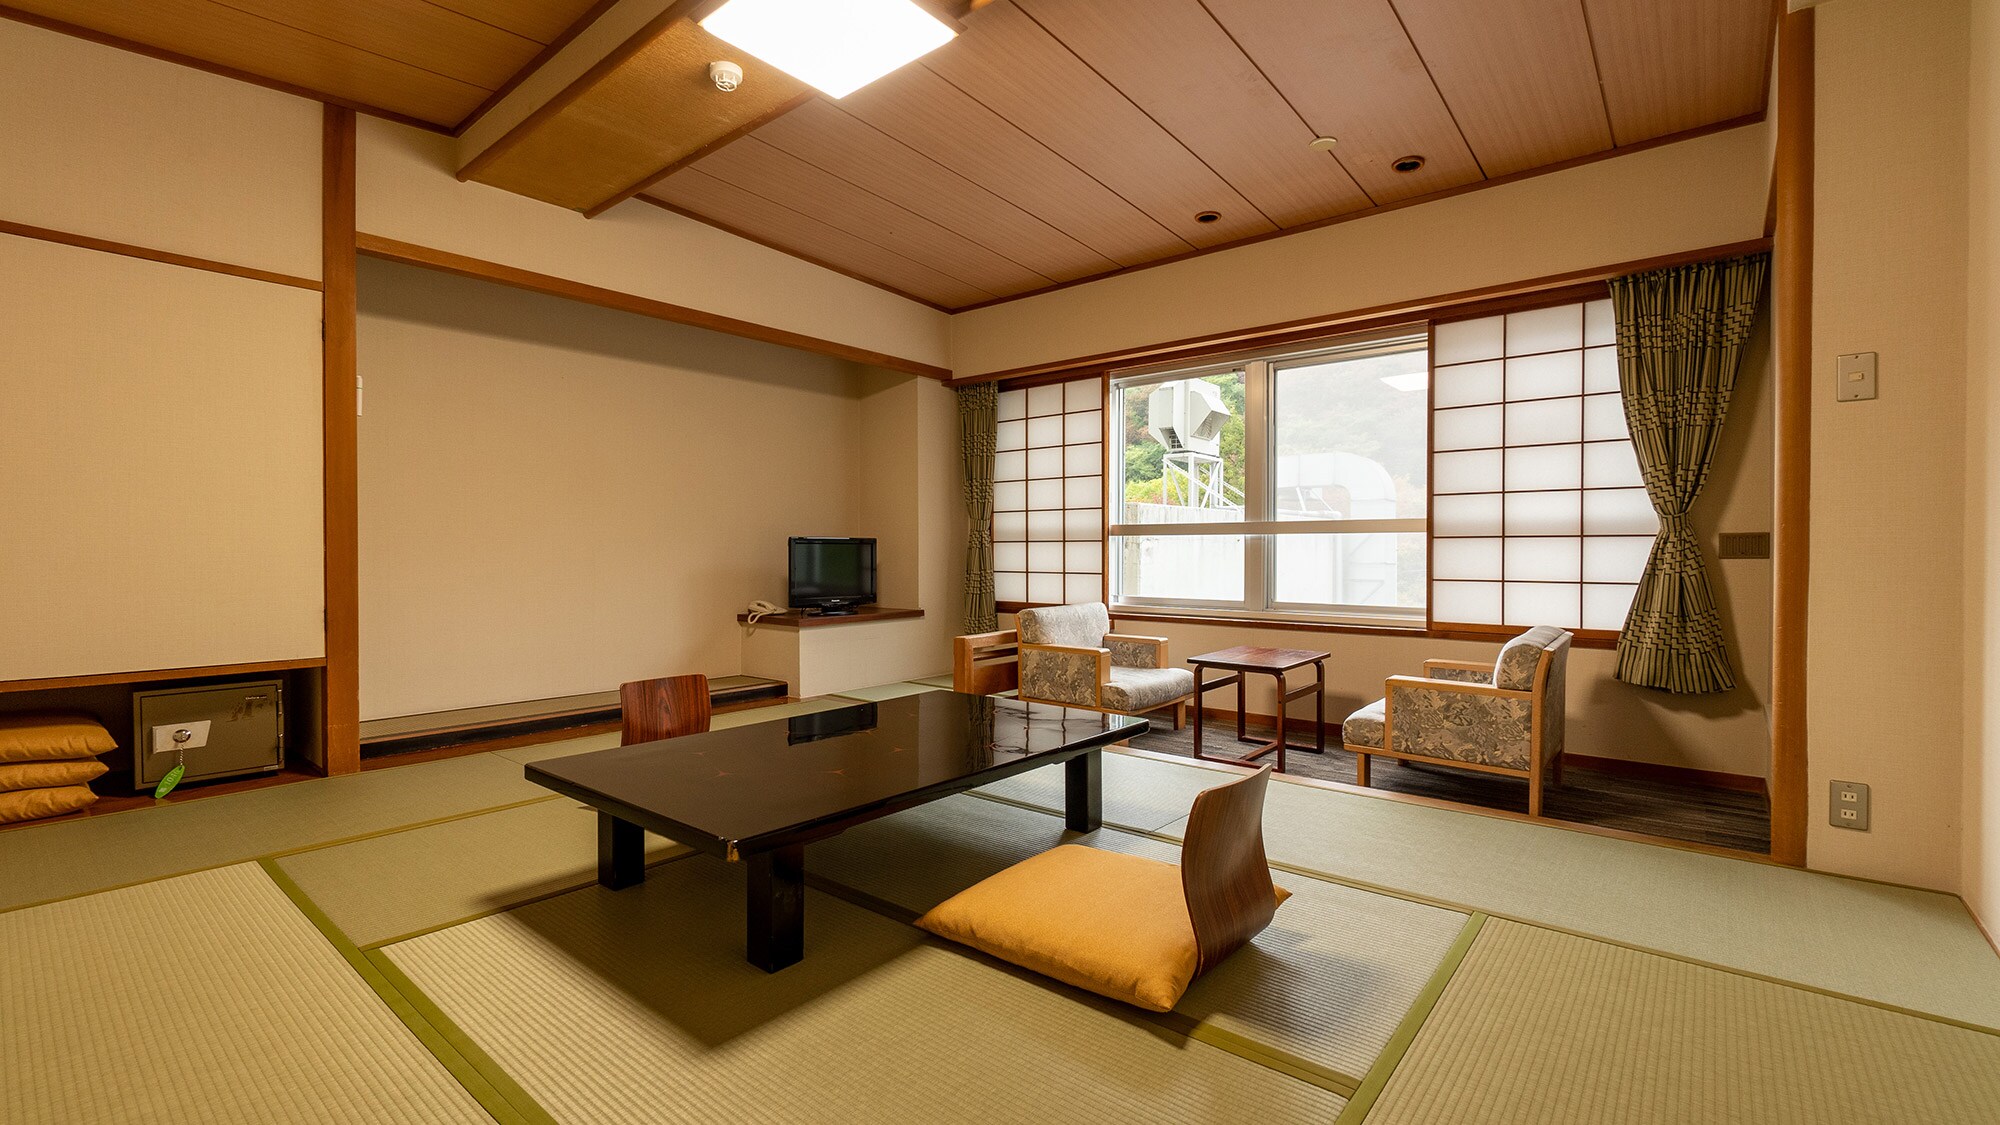 Old building Japanese-style room 10 tatami mats